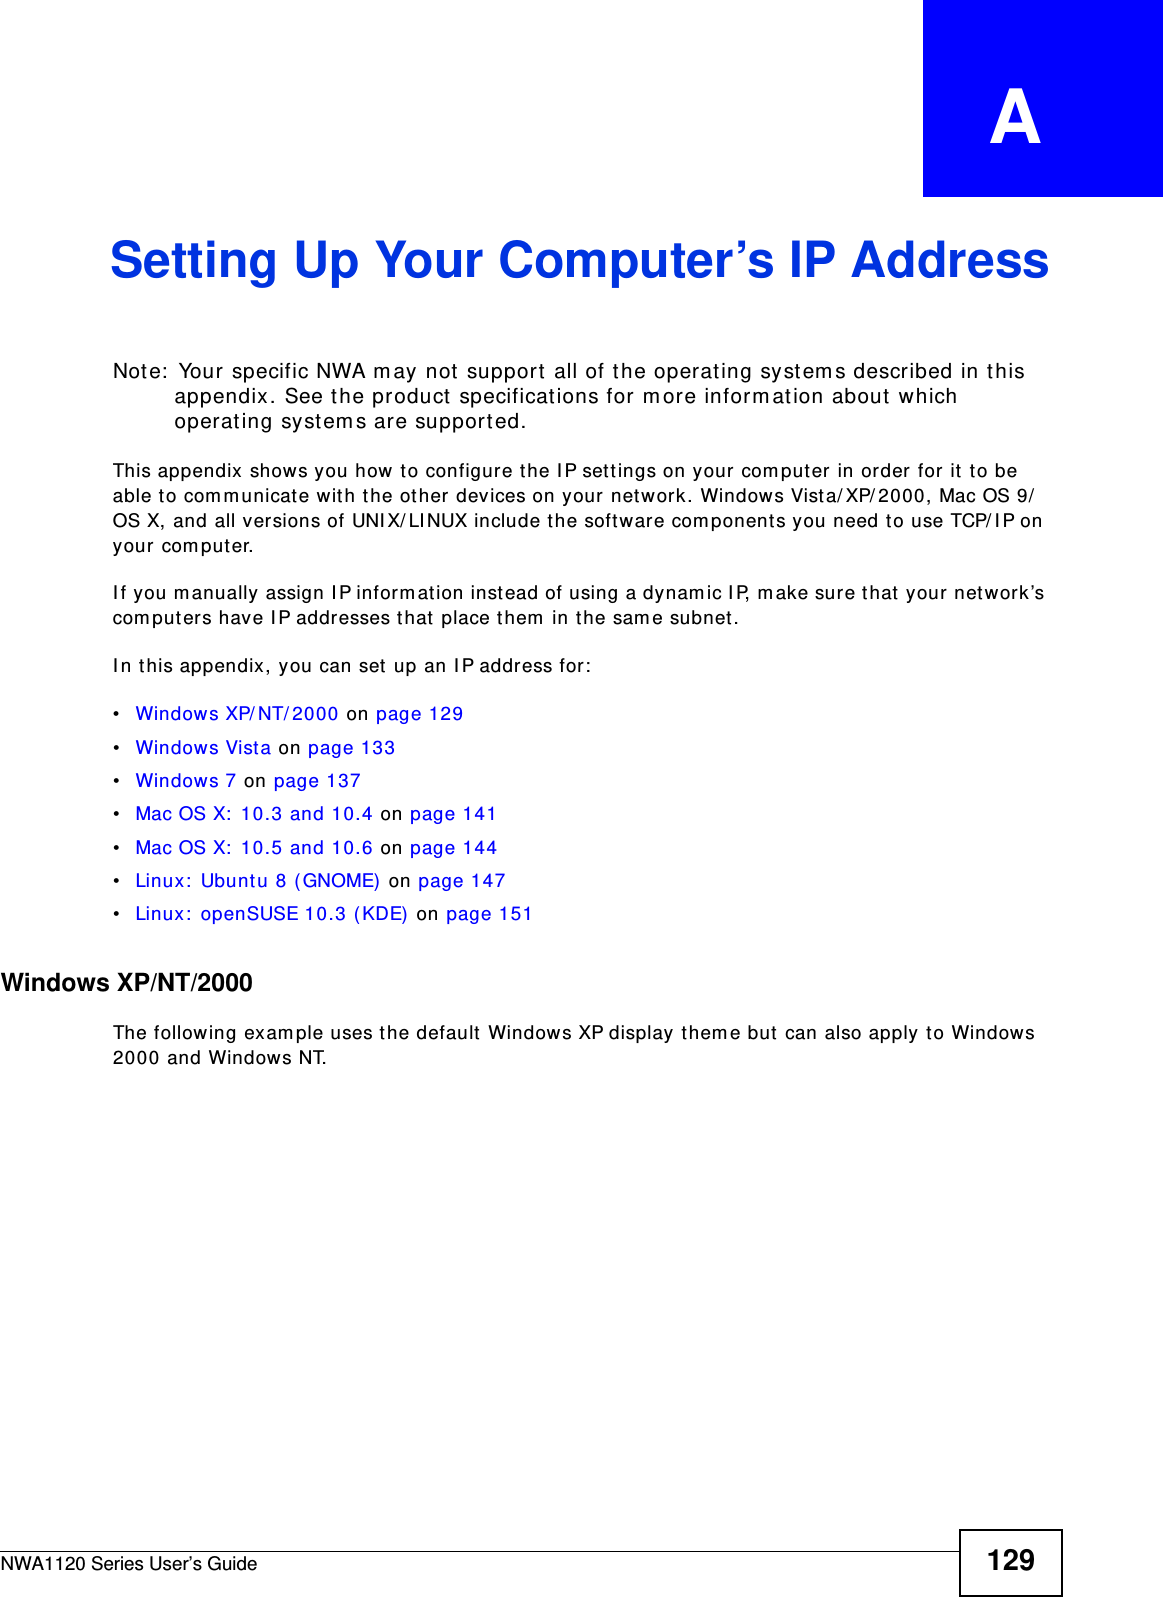 NWA1120 Series User’s Guide 129APPENDIX   ASetting Up Your Computer’s IP AddressNote: Your specific NWA may not support all of the operating systems described in this appendix. See the product specifications for more information about which operating systems are supported.This appendix shows you how to configure the IP settings on your computer in order for it to be able to communicate with the other devices on your network. Windows Vista/XP/2000, Mac OS 9/OS X, and all versions of UNIX/LINUX include the software components you need to use TCP/IP on your computer. If you manually assign IP information instead of using a dynamic IP, make sure that your network’s computers have IP addresses that place them in the same subnet.In this appendix, you can set up an IP address for:•Windows XP/NT/2000 on page 129•Windows Vista on page 133•Windows 7 on page 137•Mac OS X: 10.3 and 10.4 on page 141•Mac OS X: 10.5 and 10.6 on page 144•Linux: Ubuntu 8 (GNOME) on page 147•Linux: openSUSE 10.3 (KDE) on page 151Windows XP/NT/2000The following example uses the default Windows XP display theme but can also apply to Windows 2000 and Windows NT.